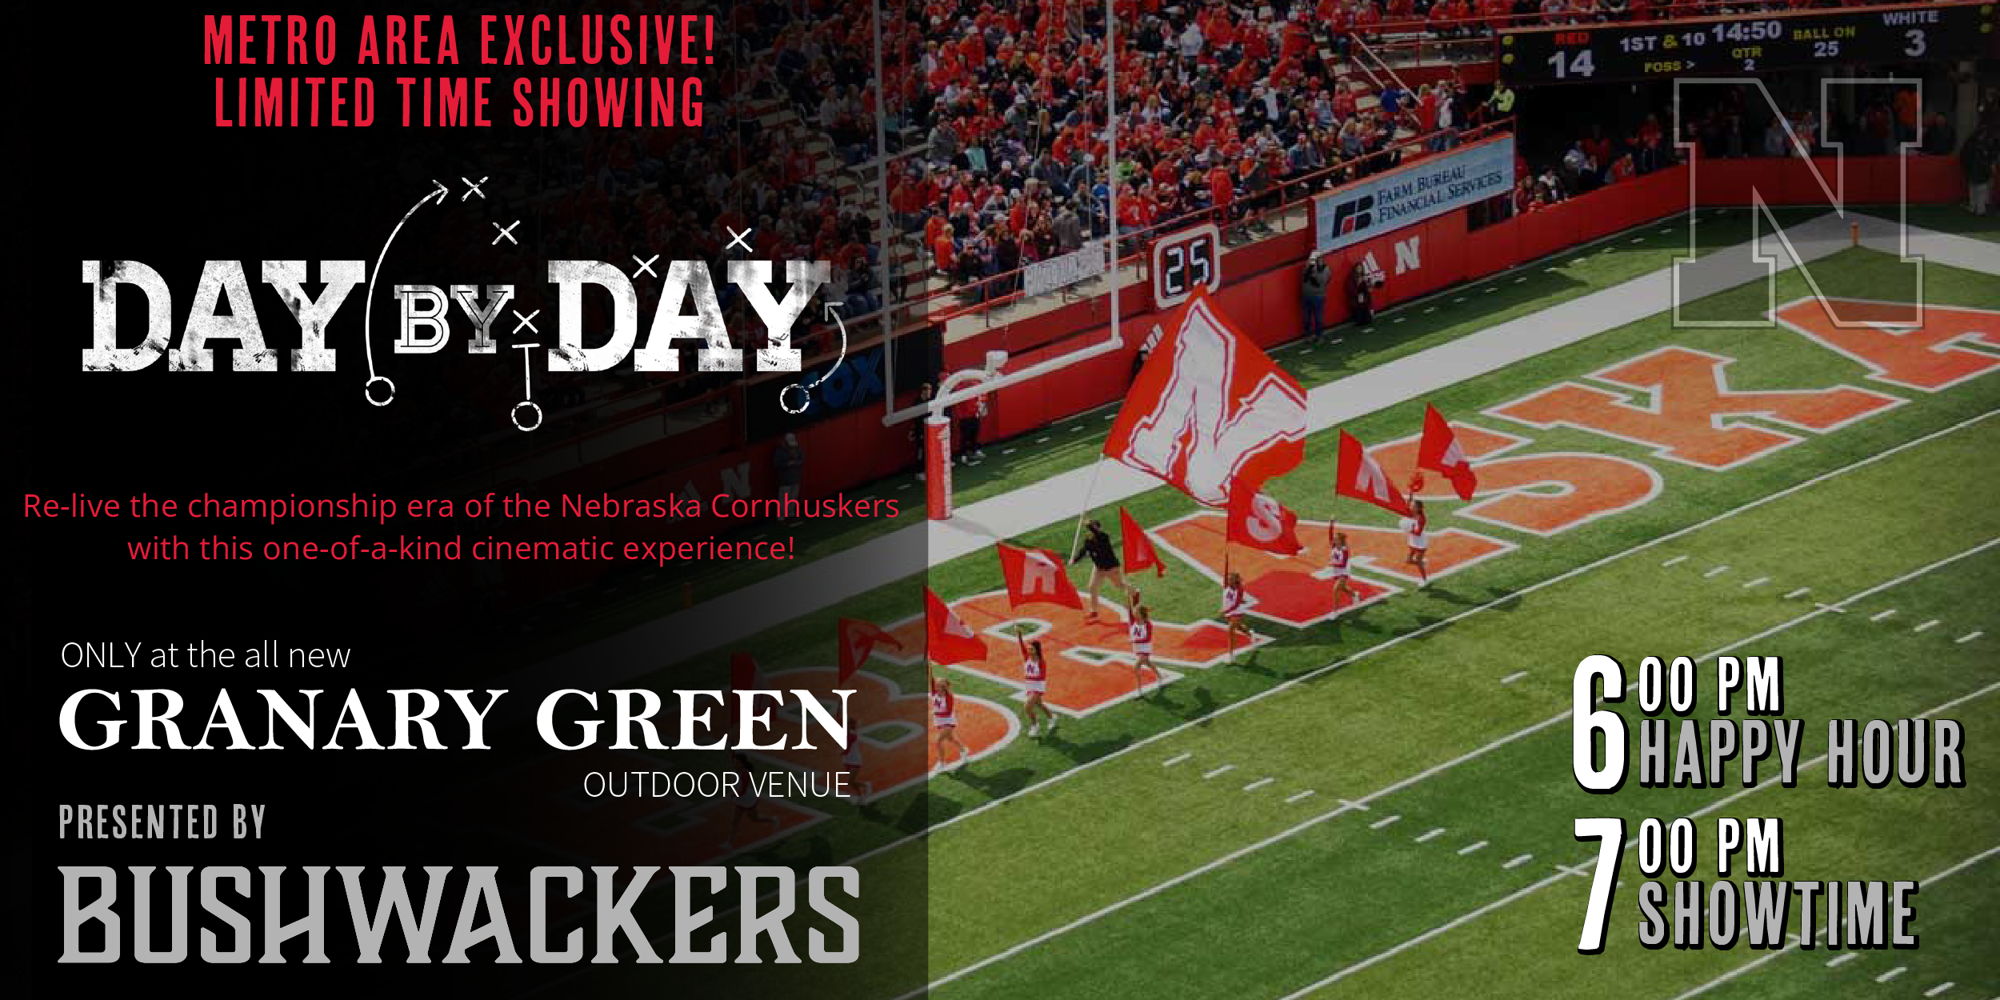 Week 4 of 8: Friday Night Football Film - Showing of "Day by Day" Husker Documentary (Part 1) promotional image